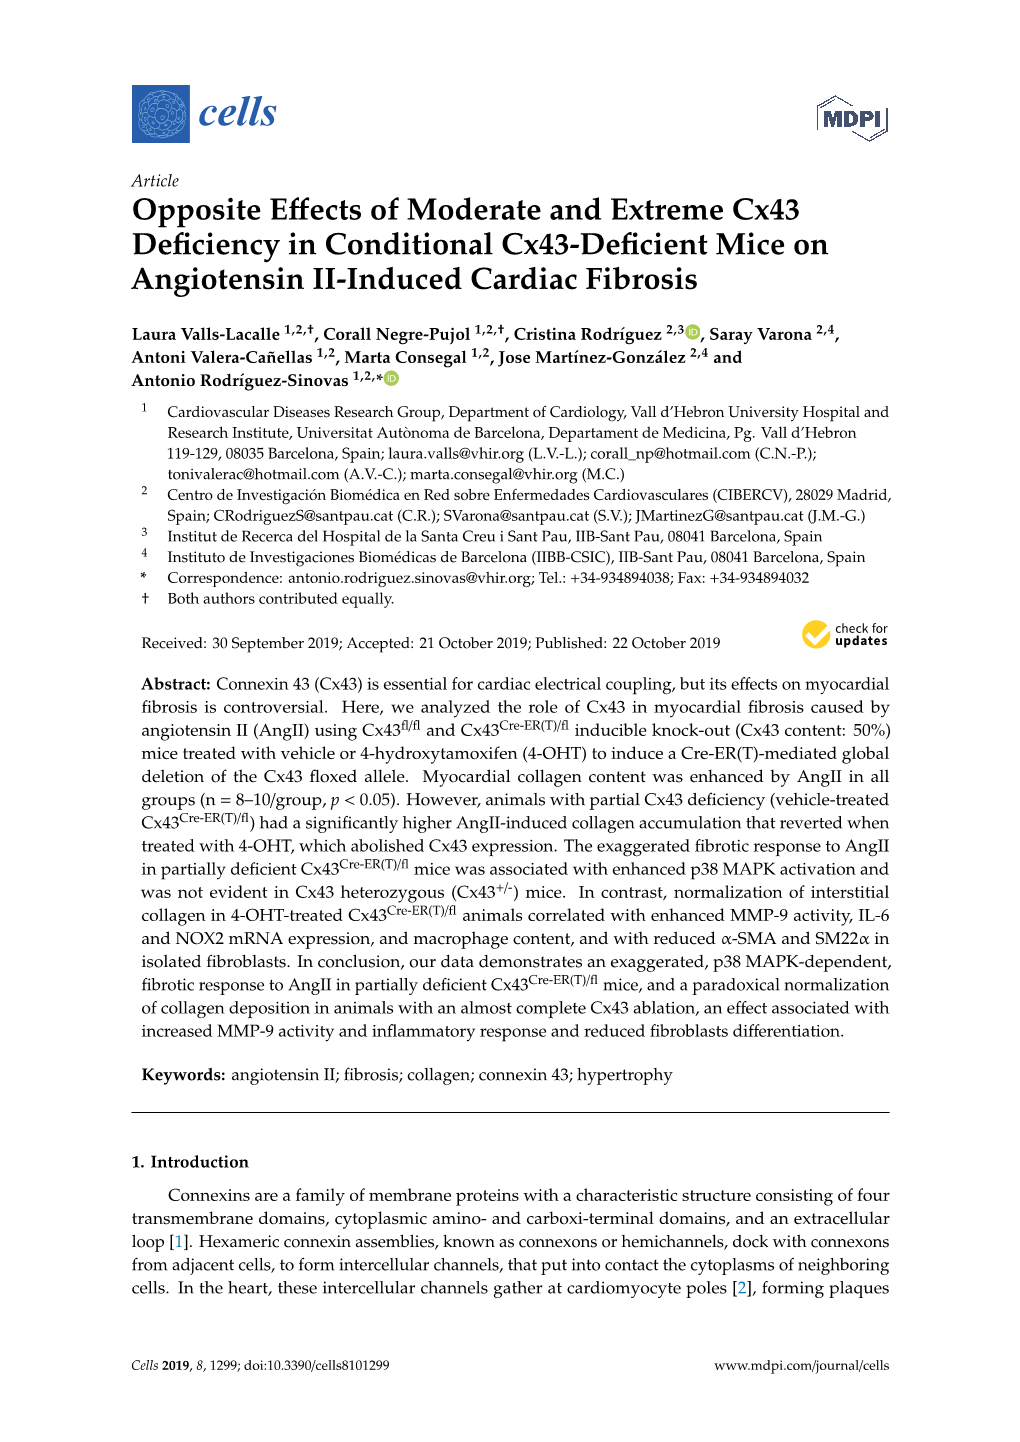 Opposite Effects of Moderate and Extreme Cx43 Deficiency In